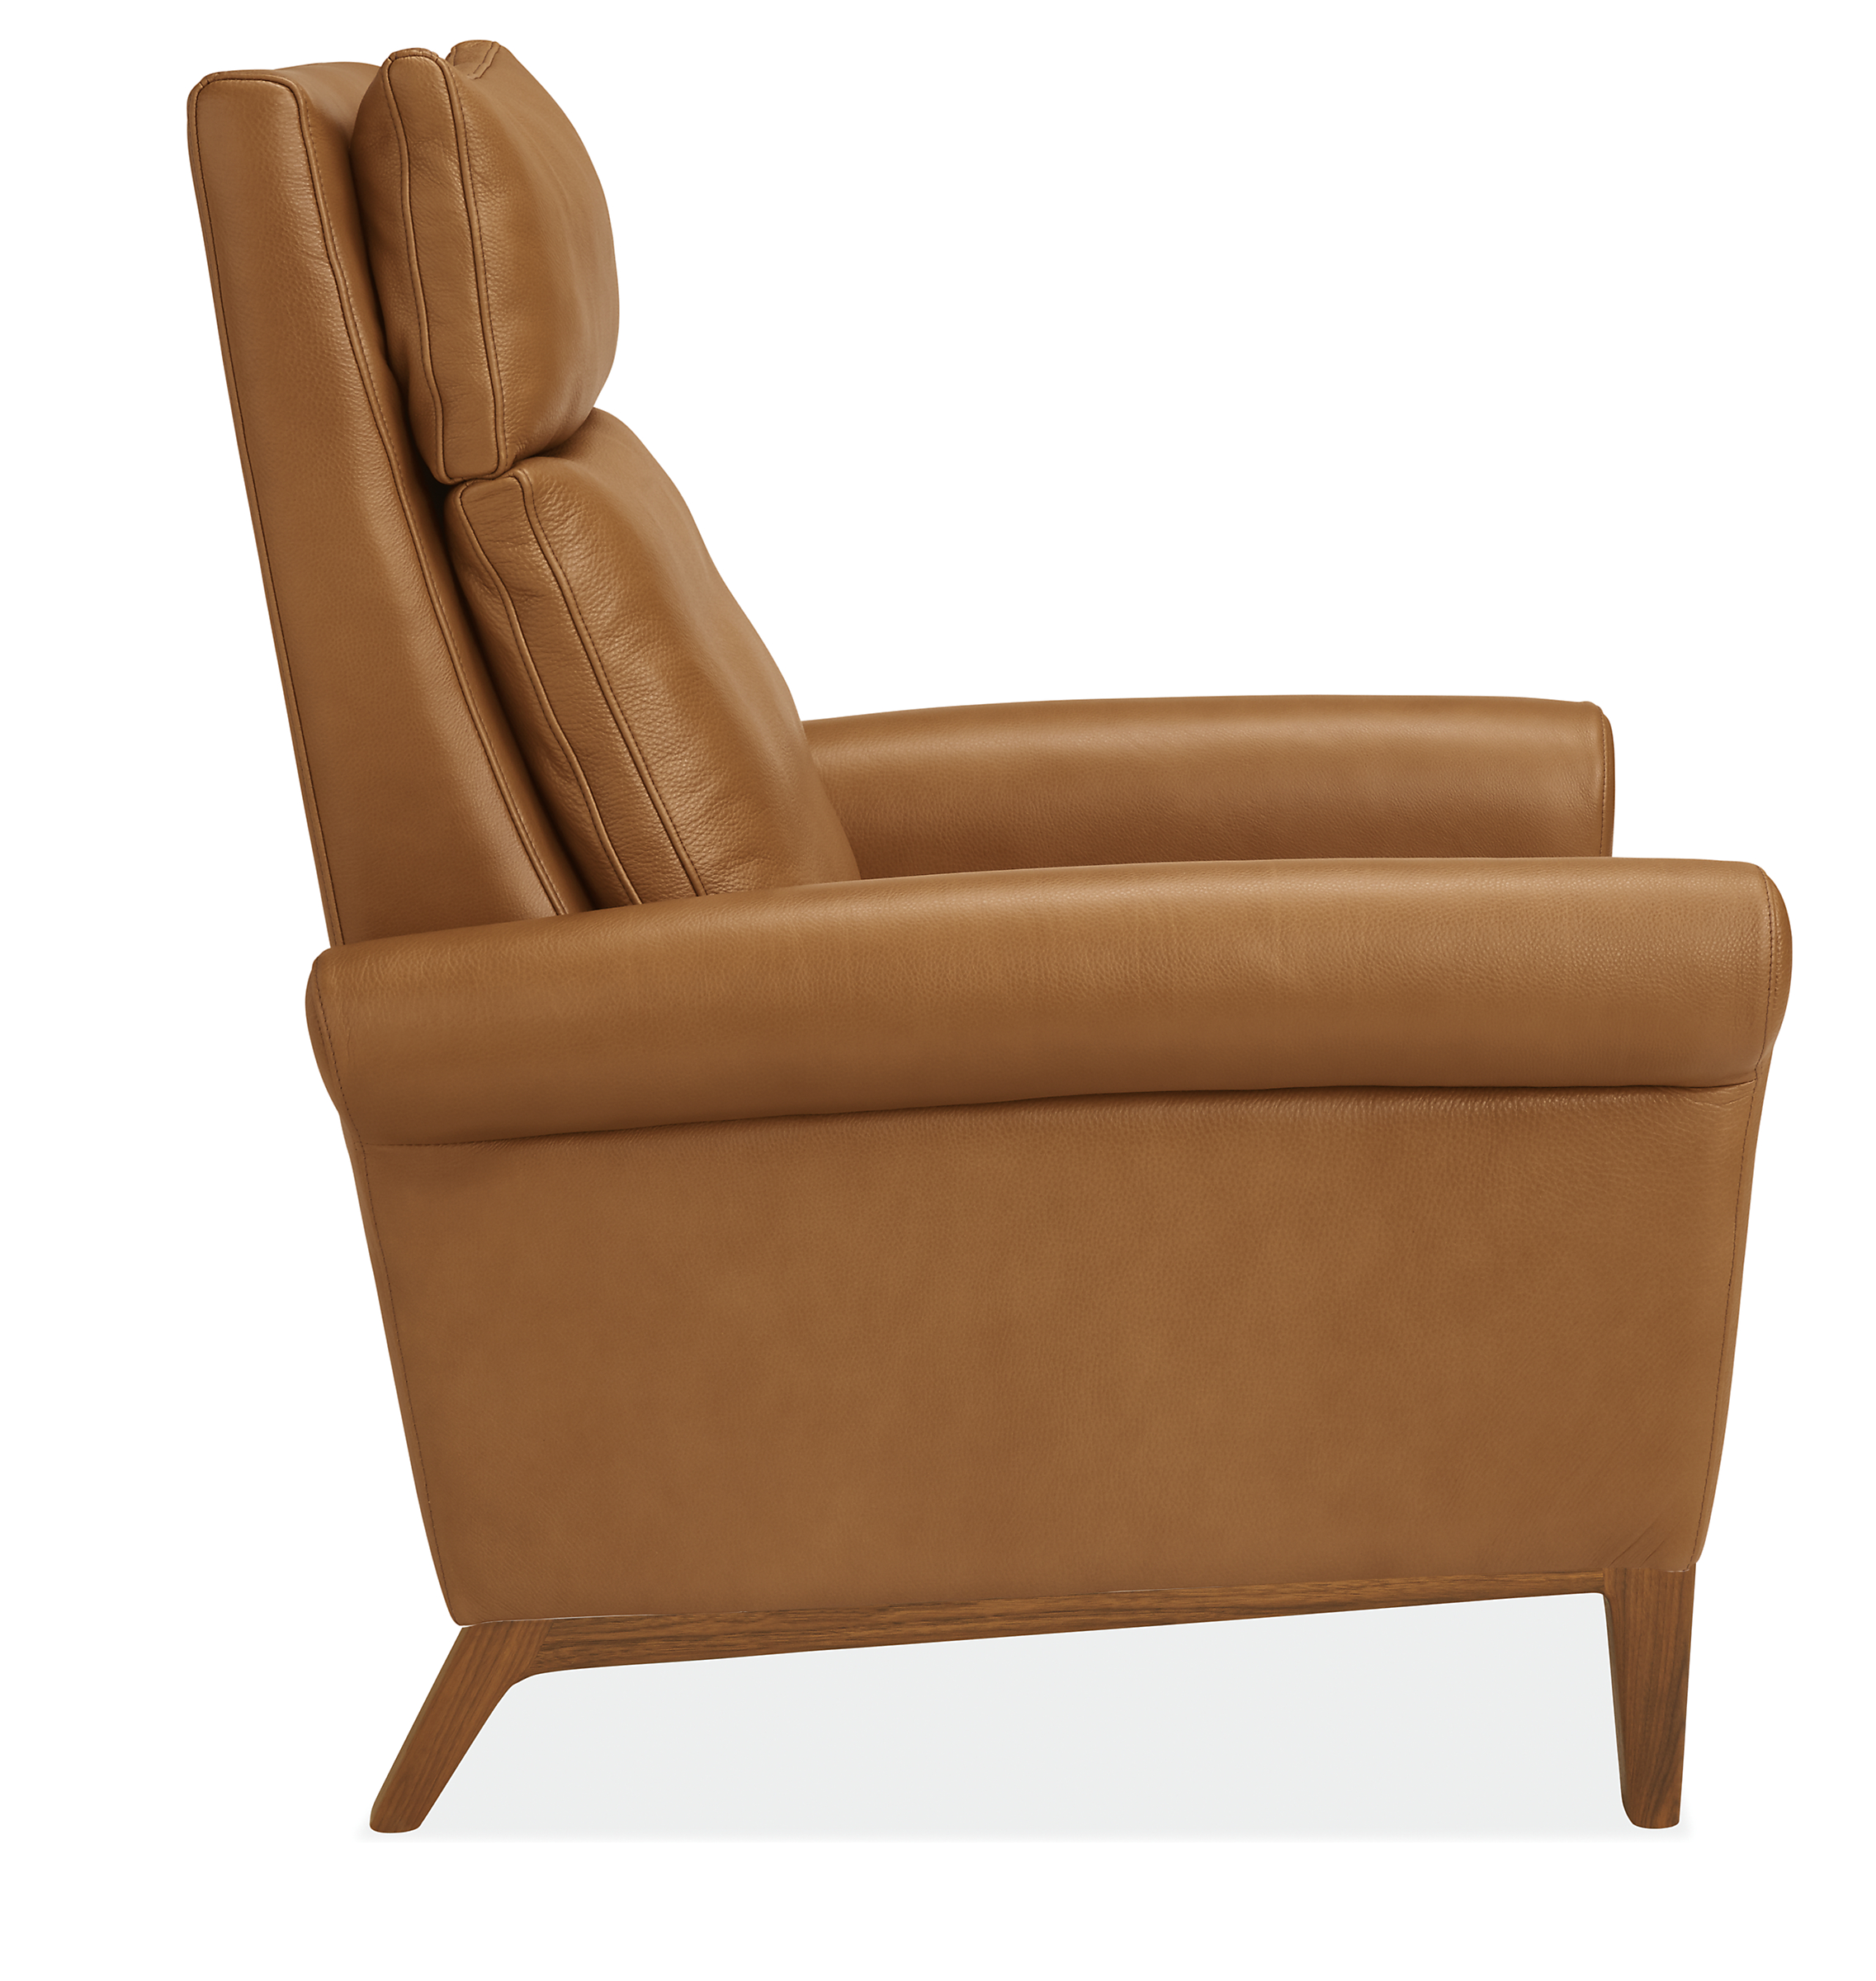 Side view of Isaac Select Recliner Rolled-Arm in Lecco Leather with Wood Base.